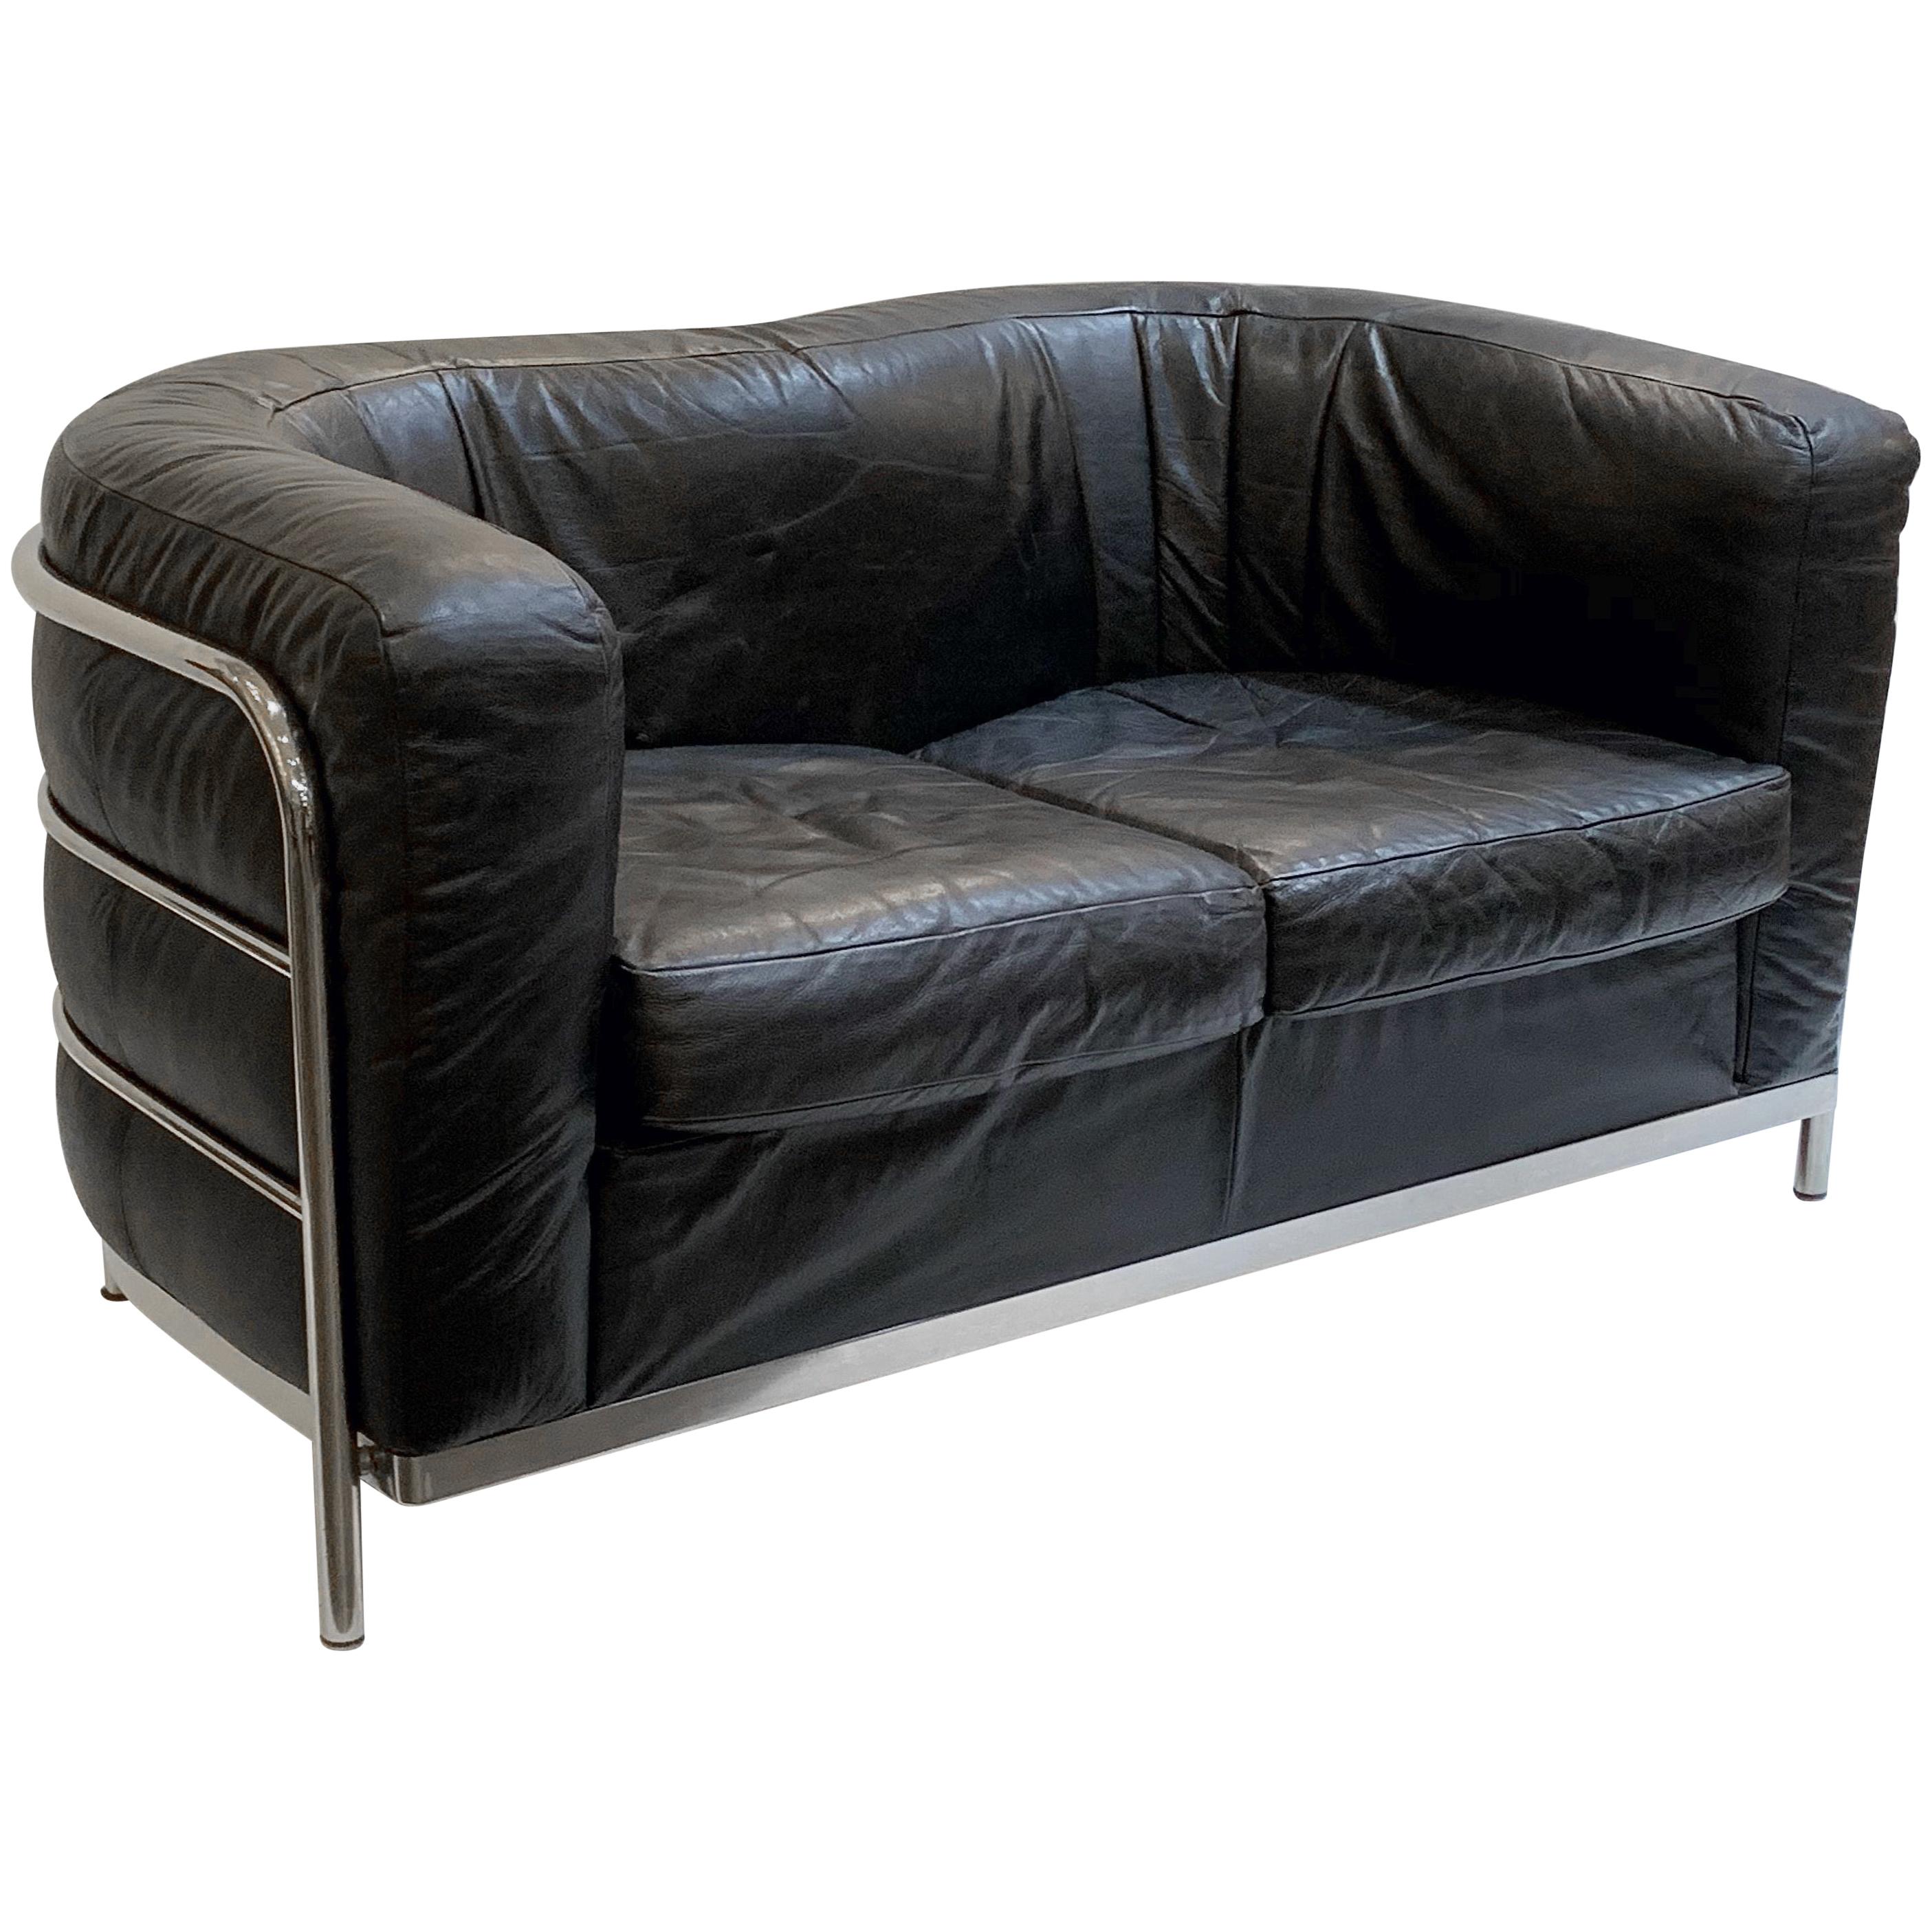 The Moderns Modernity Sofa of Chrome and Black Leather by Paolo Lomazzi en vente